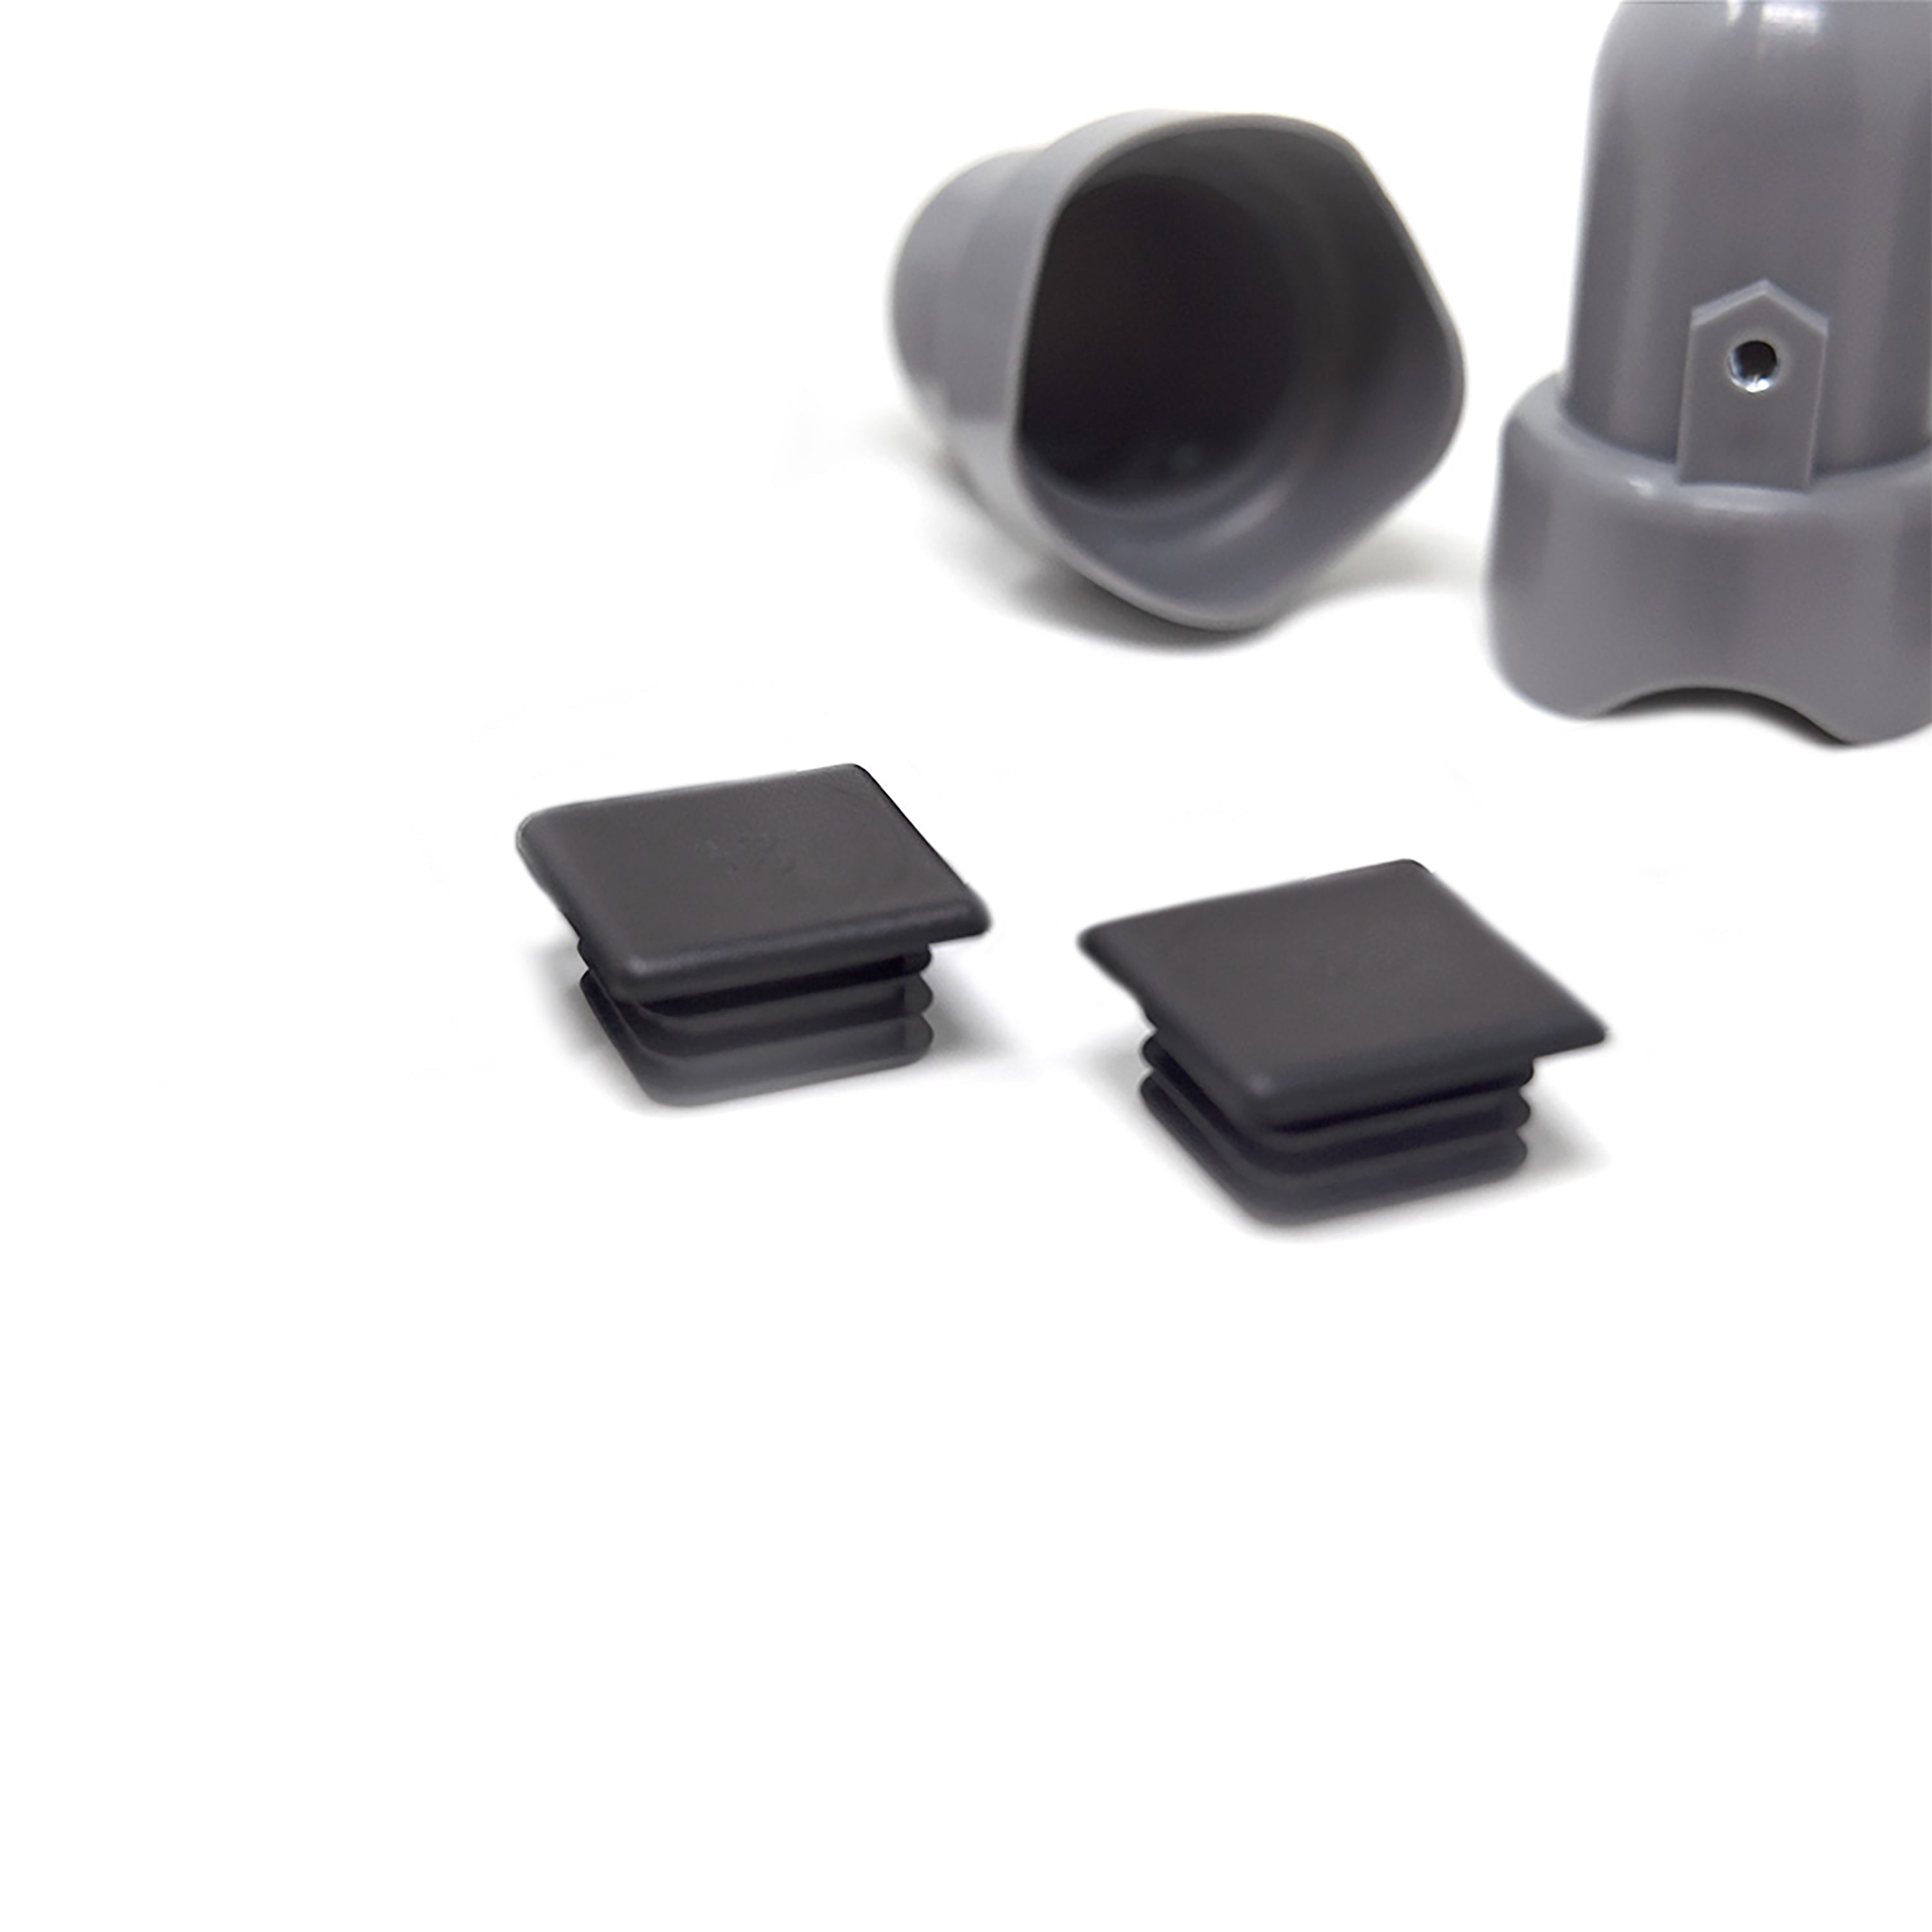 Large Grey Pole Cap Kit with Bolts and End Caps (Set of 2) 8049, 1016, 8003